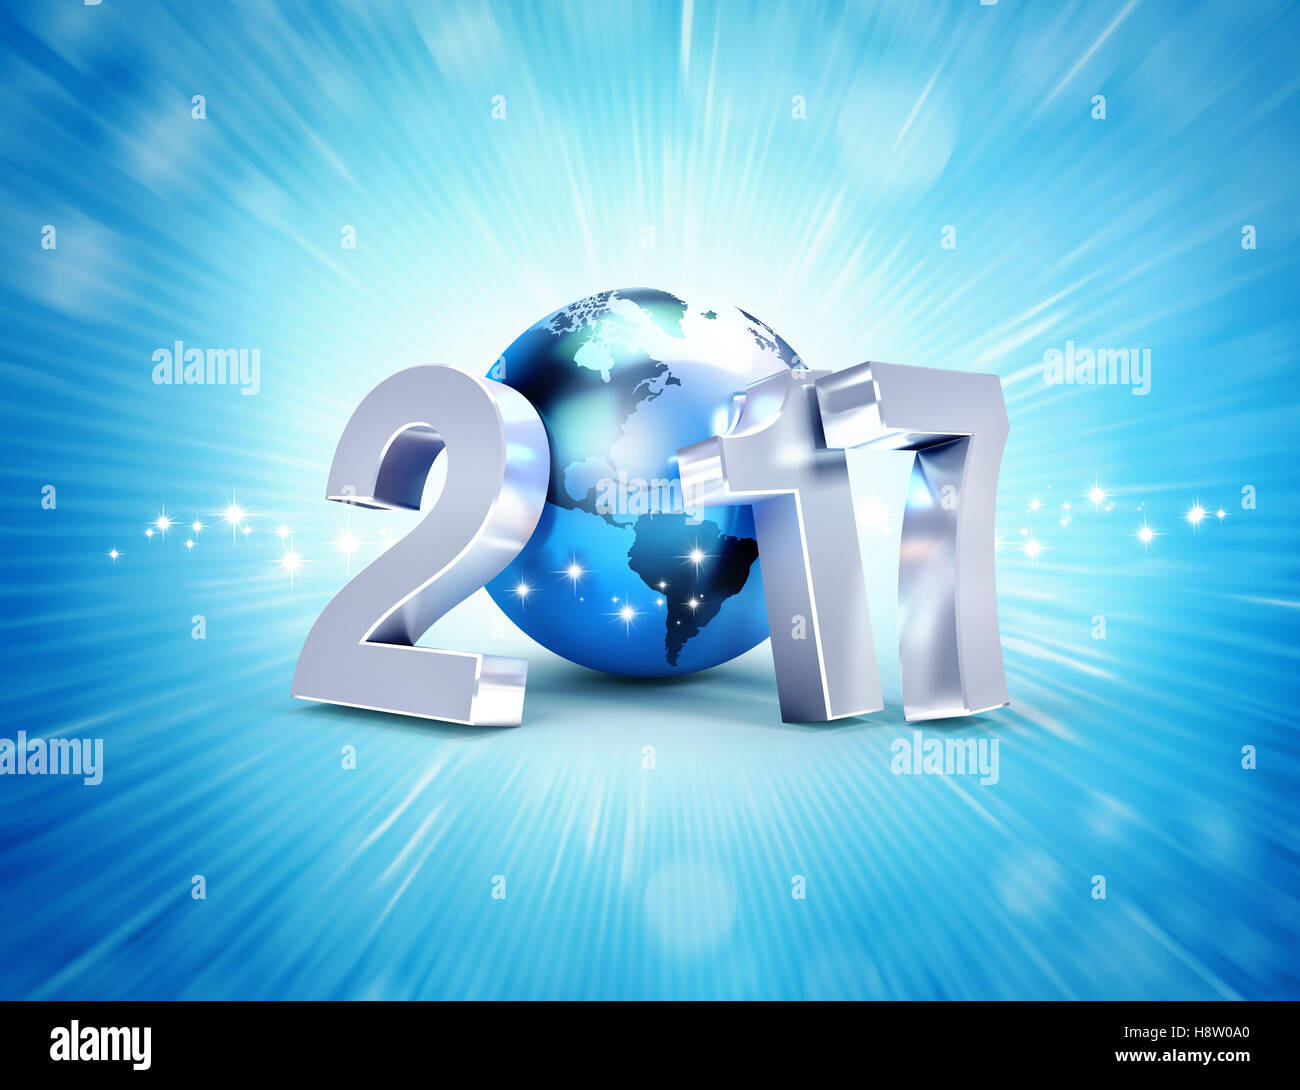 2017 New Year type composed with a blue planet earth, on a shiny blue background - 3D illustration Stock Photo